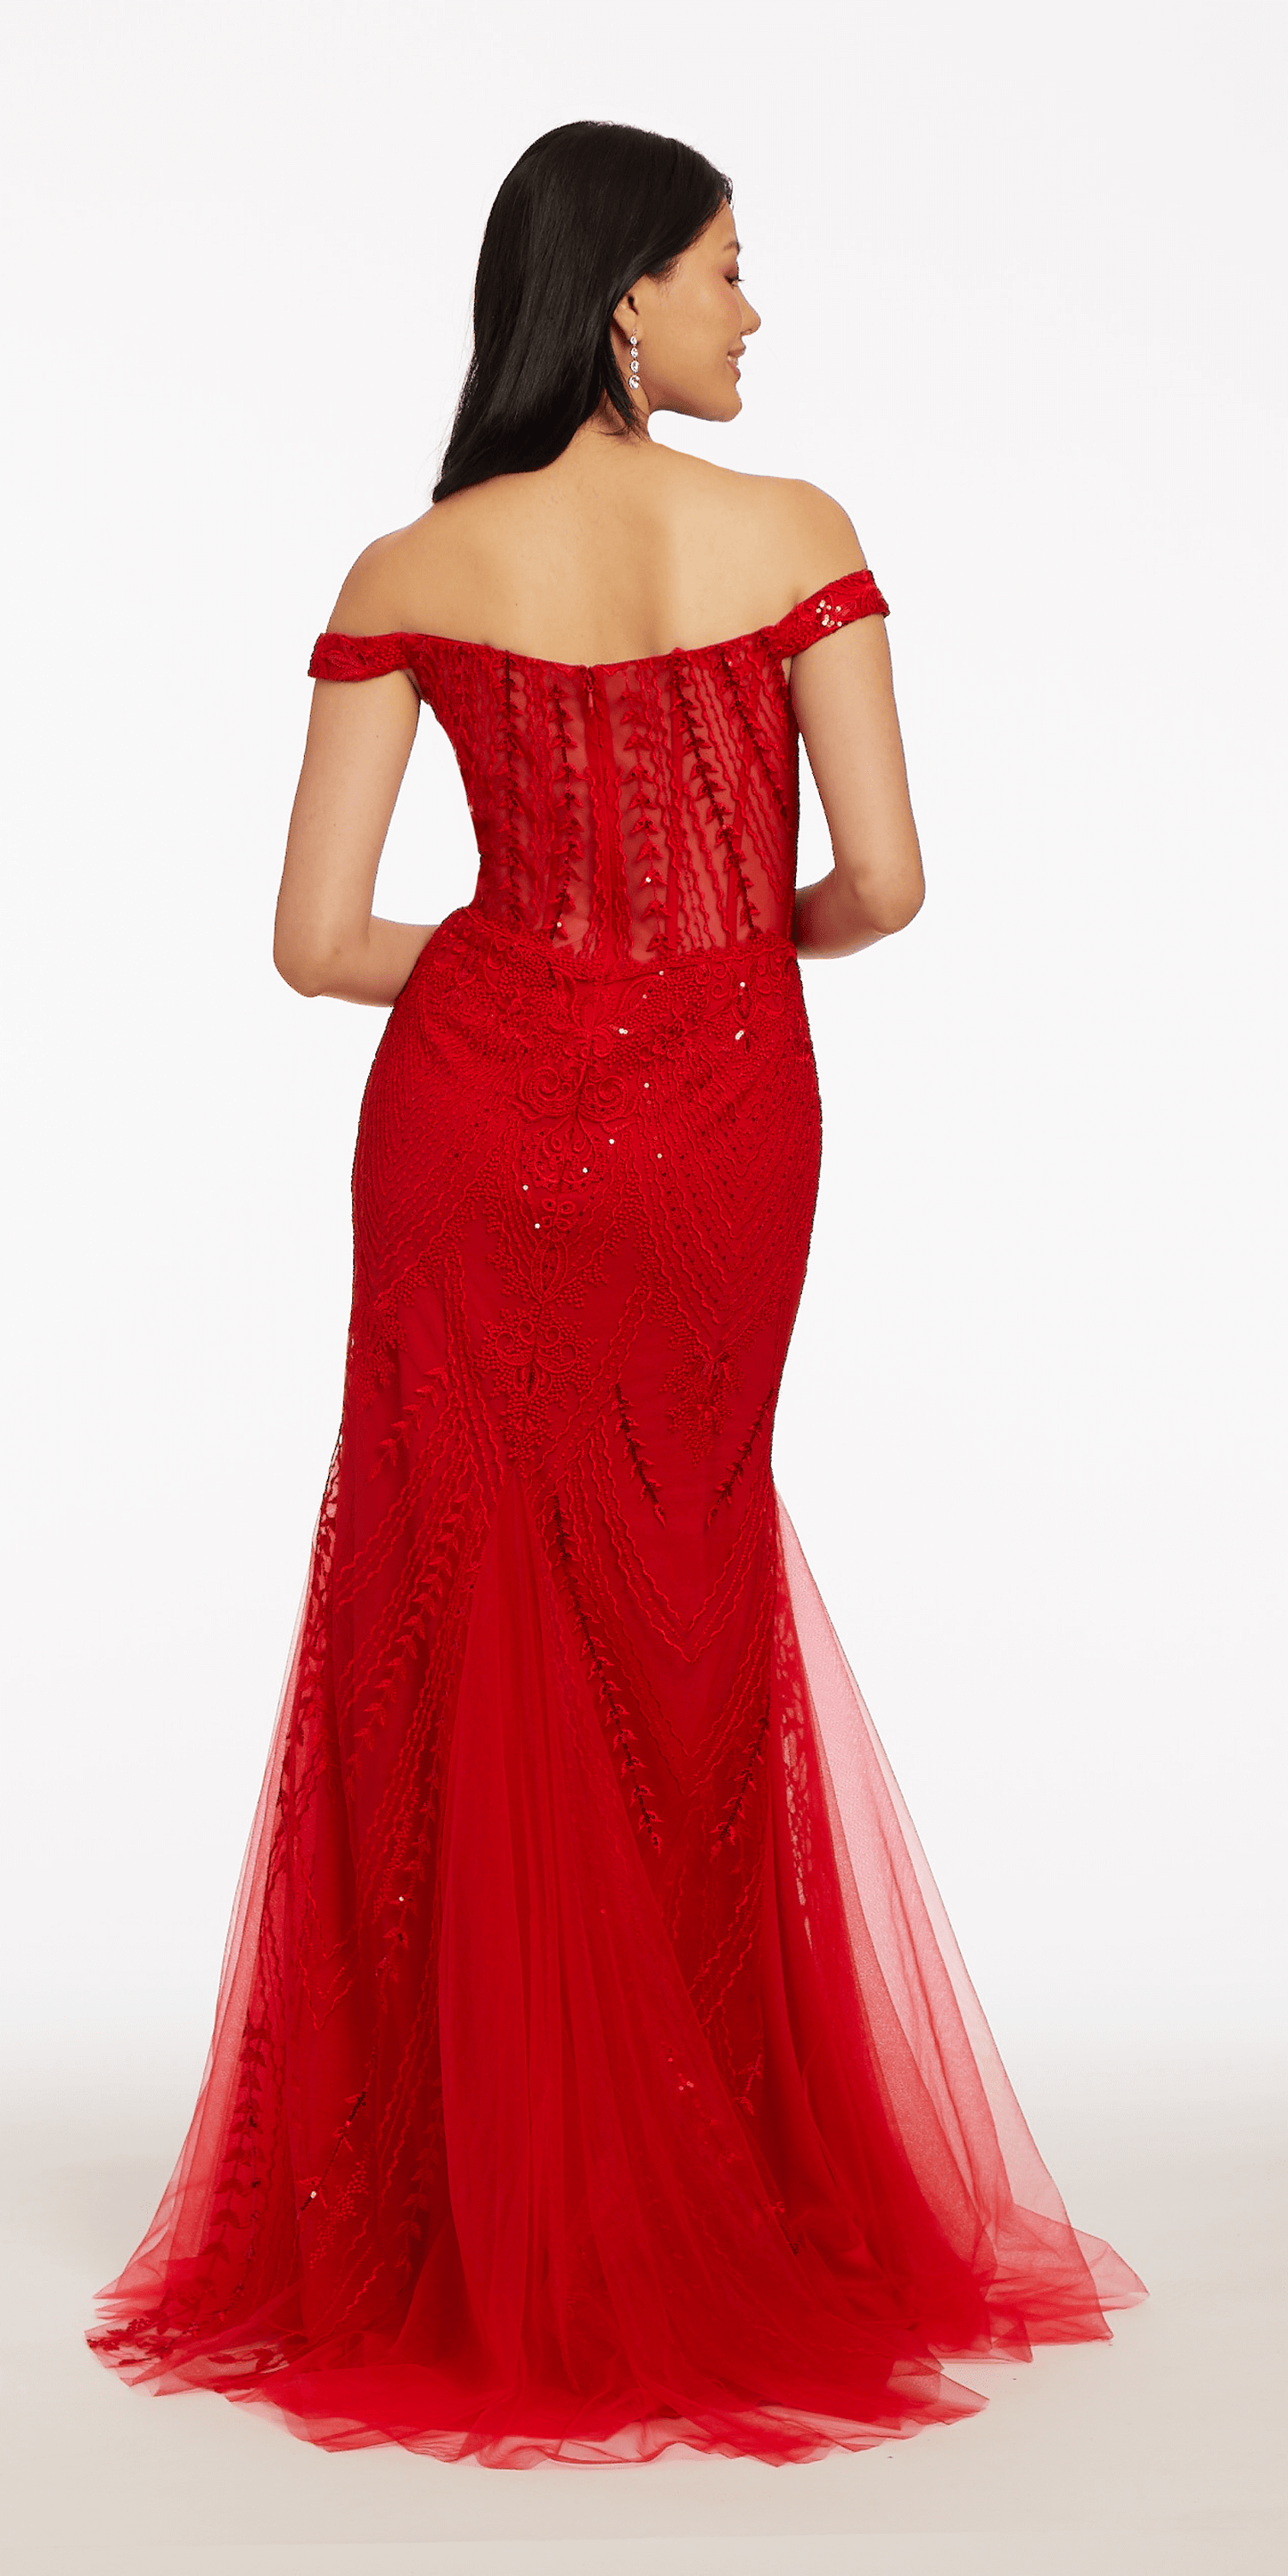 Camille La Vie Plunging Embroidered Off the Shoulder Trumpet Dress with Mesh Godets